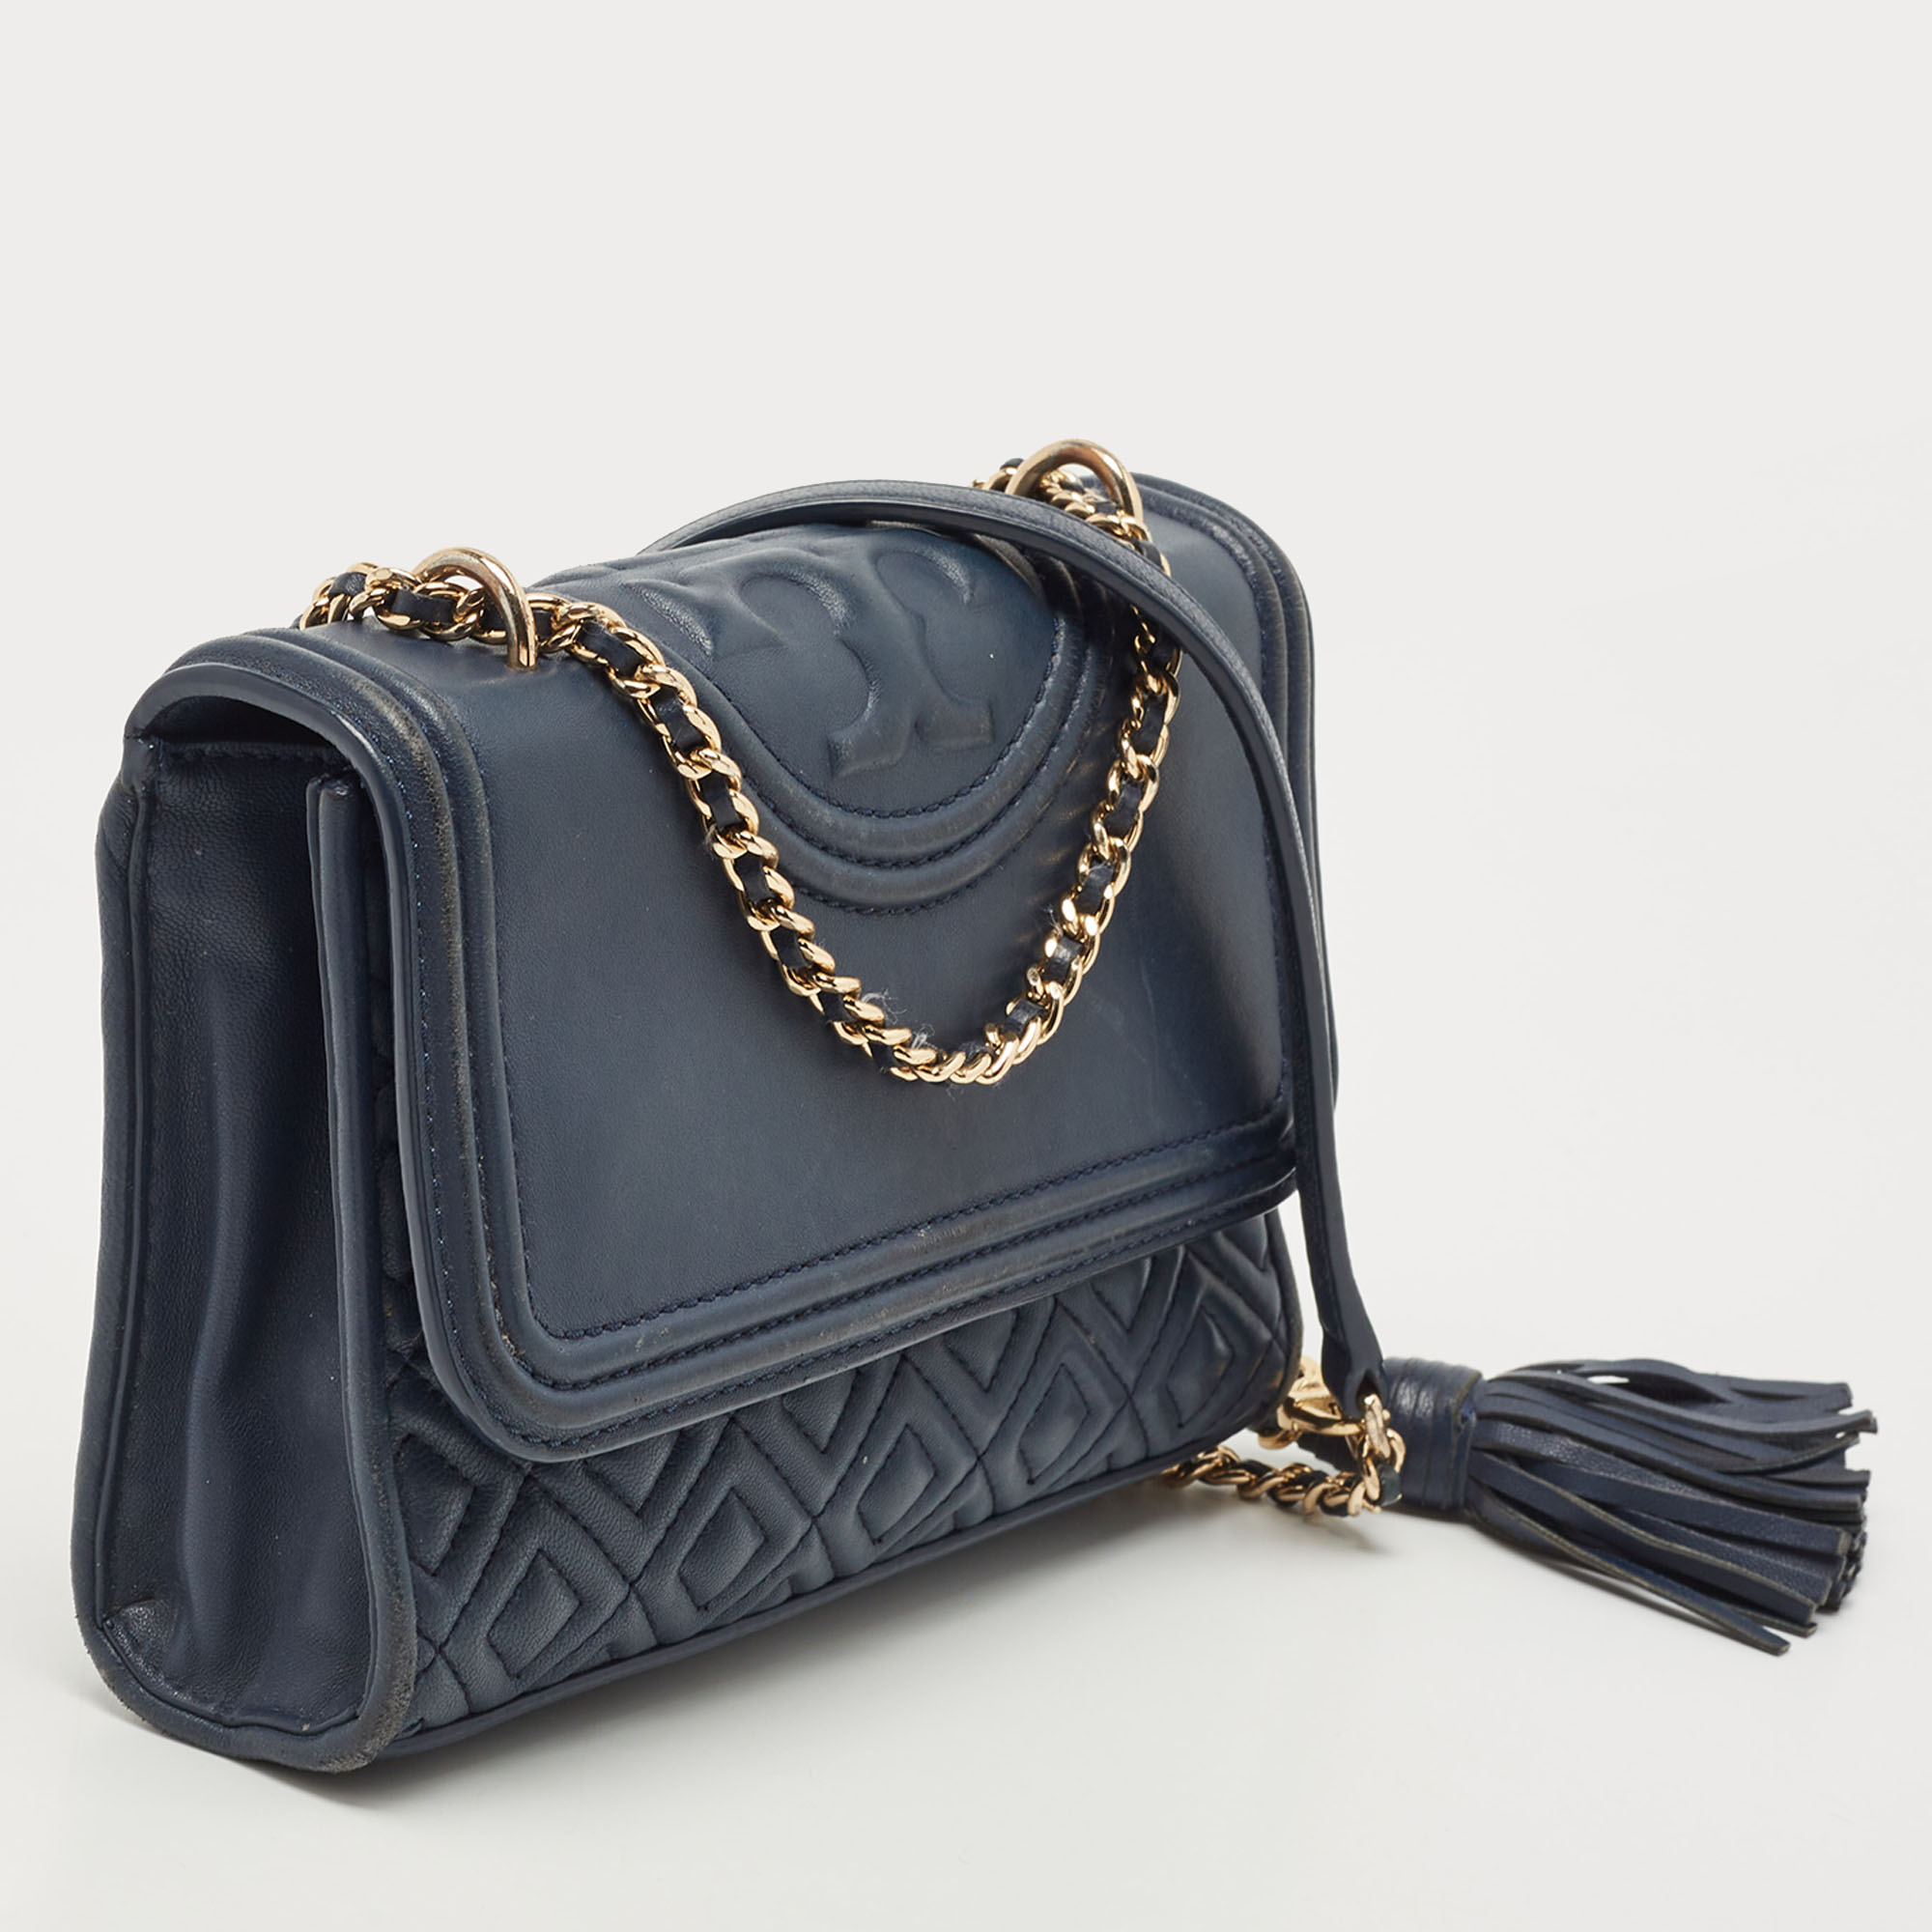 Tory Burch Navy Blue Leather Small Fleming Shoulder Bag